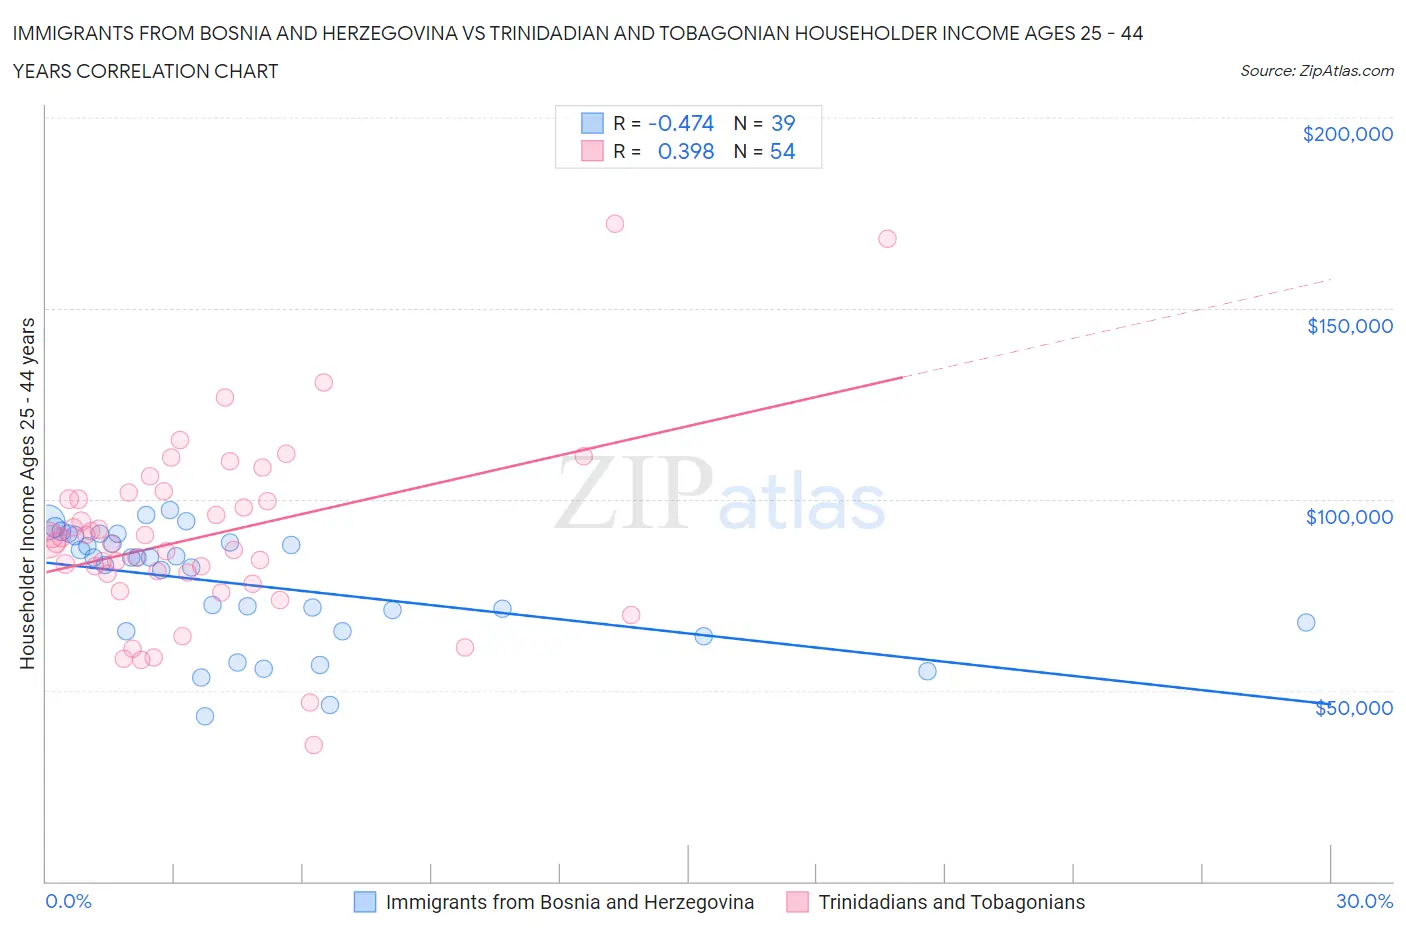 Immigrants from Bosnia and Herzegovina vs Trinidadian and Tobagonian Householder Income Ages 25 - 44 years